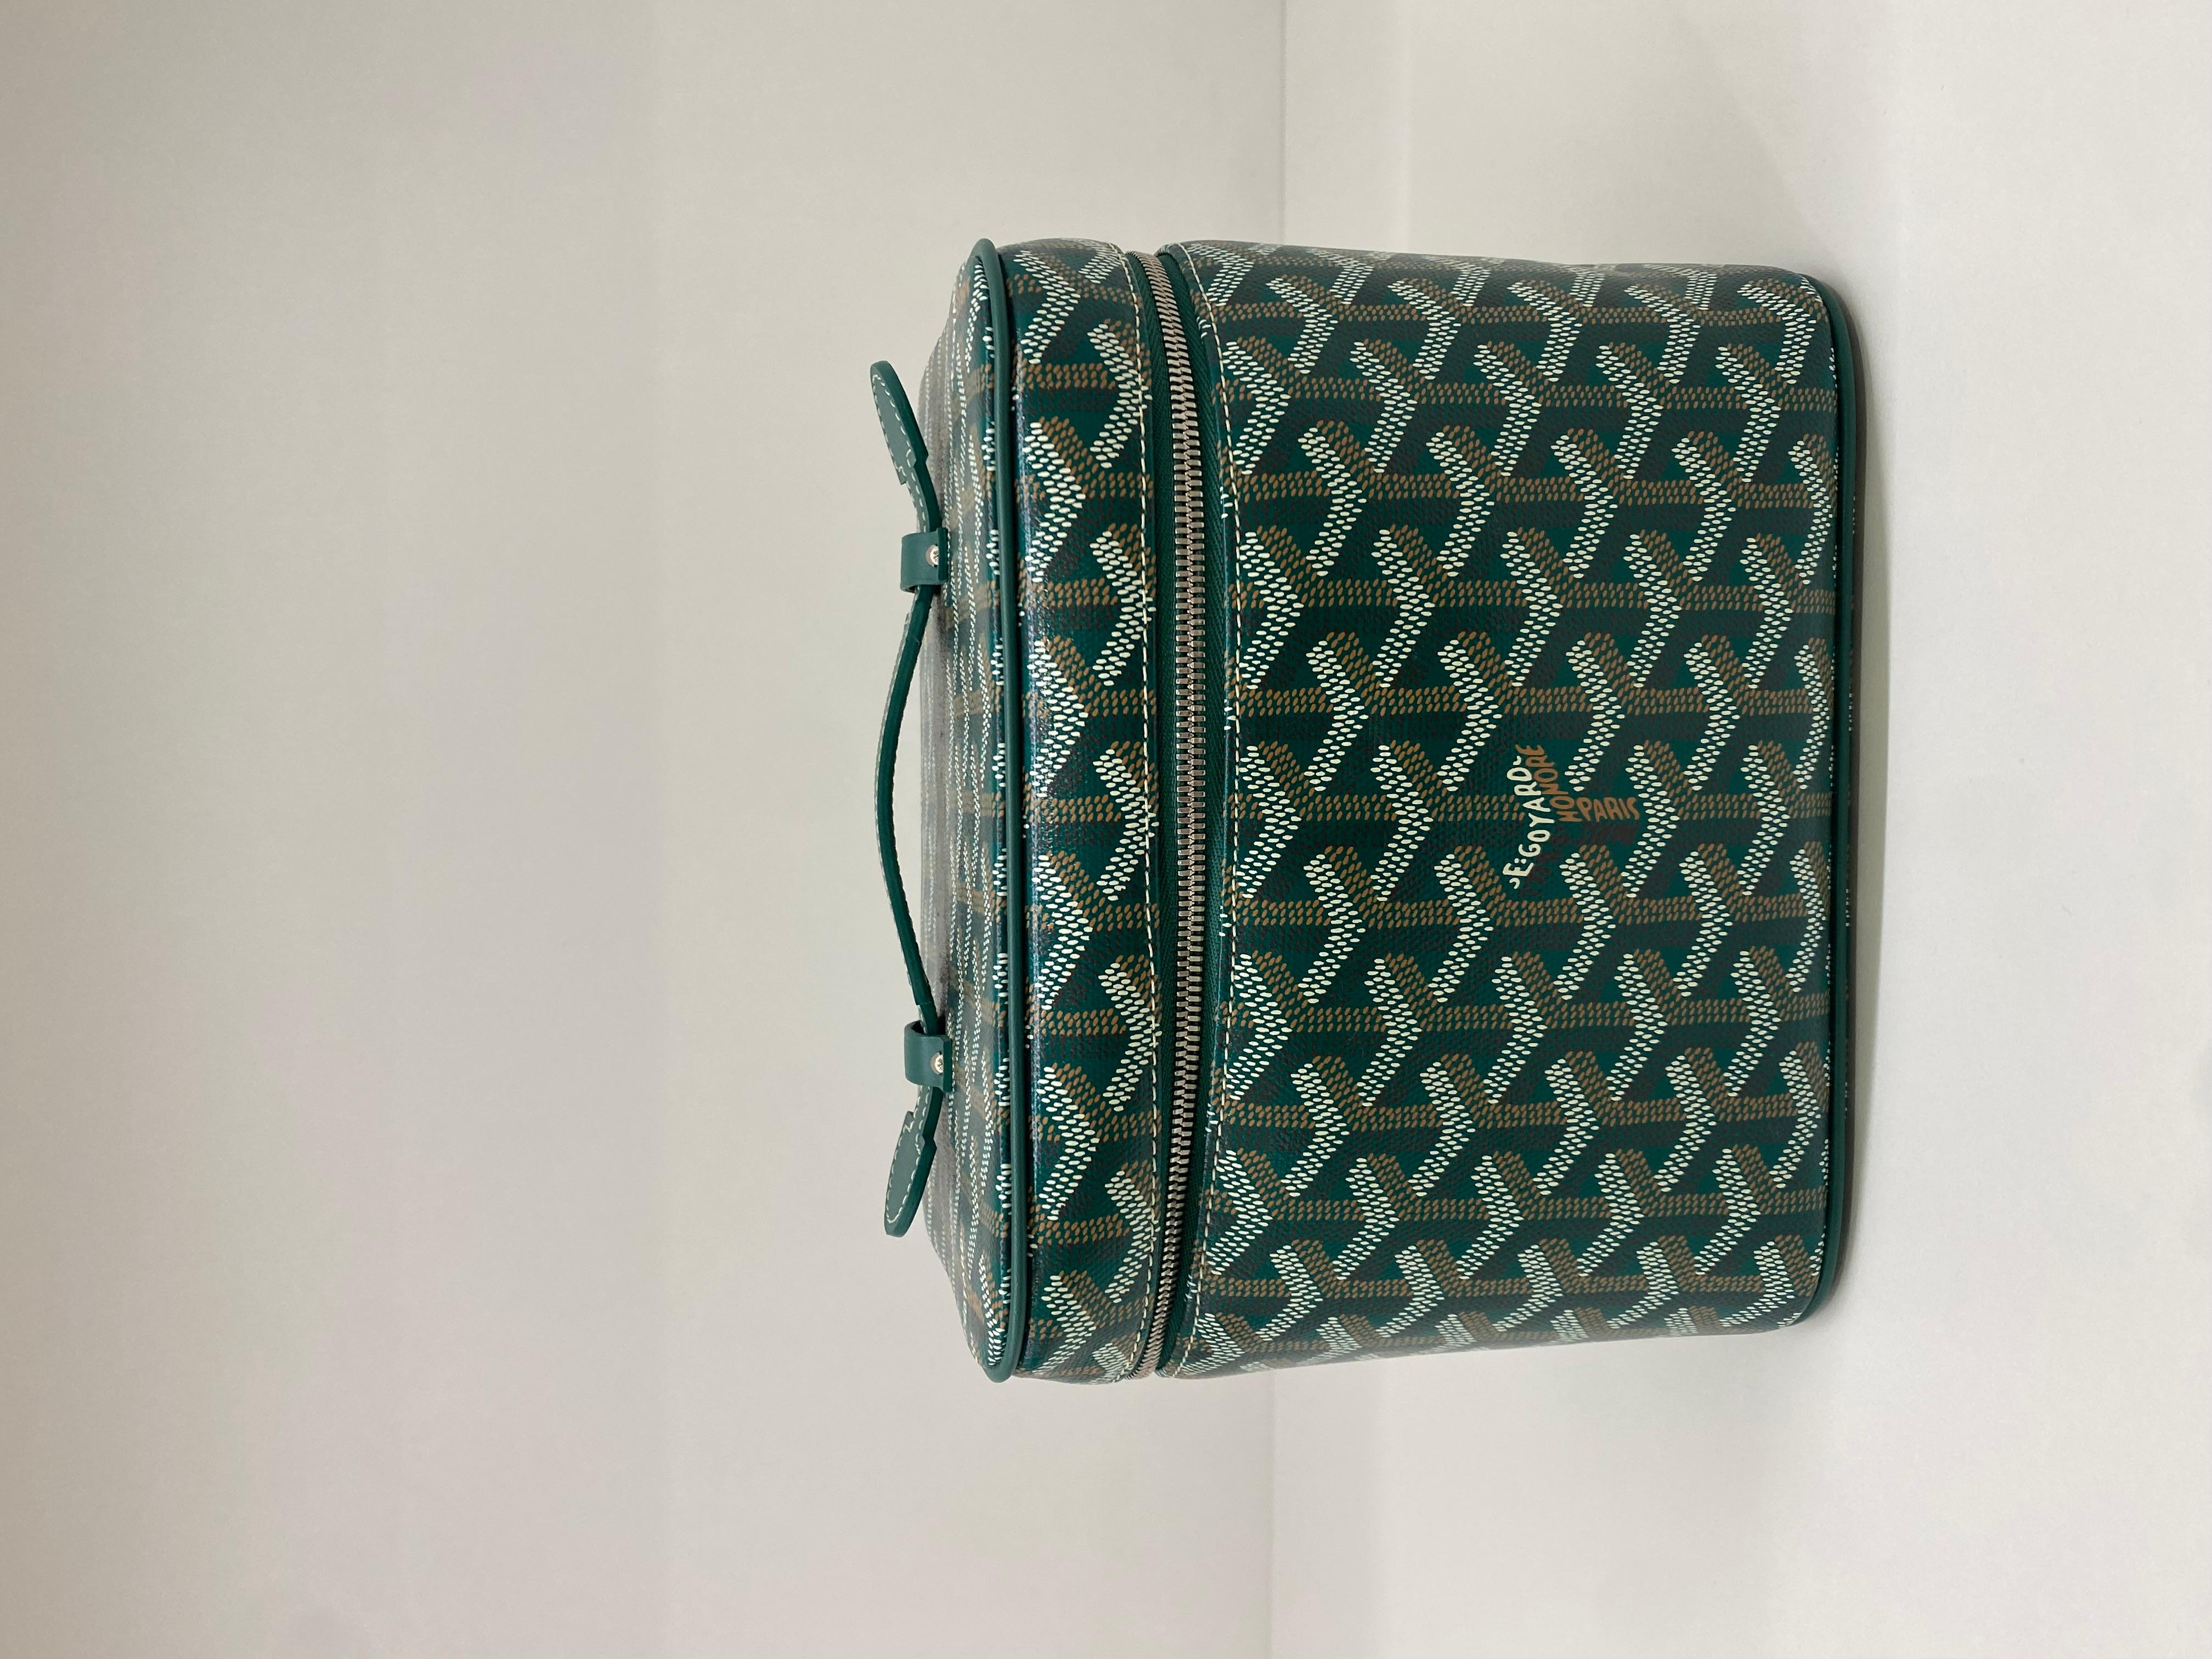 Goyard Vanity Green In New Condition For Sale In Double Bay, AU